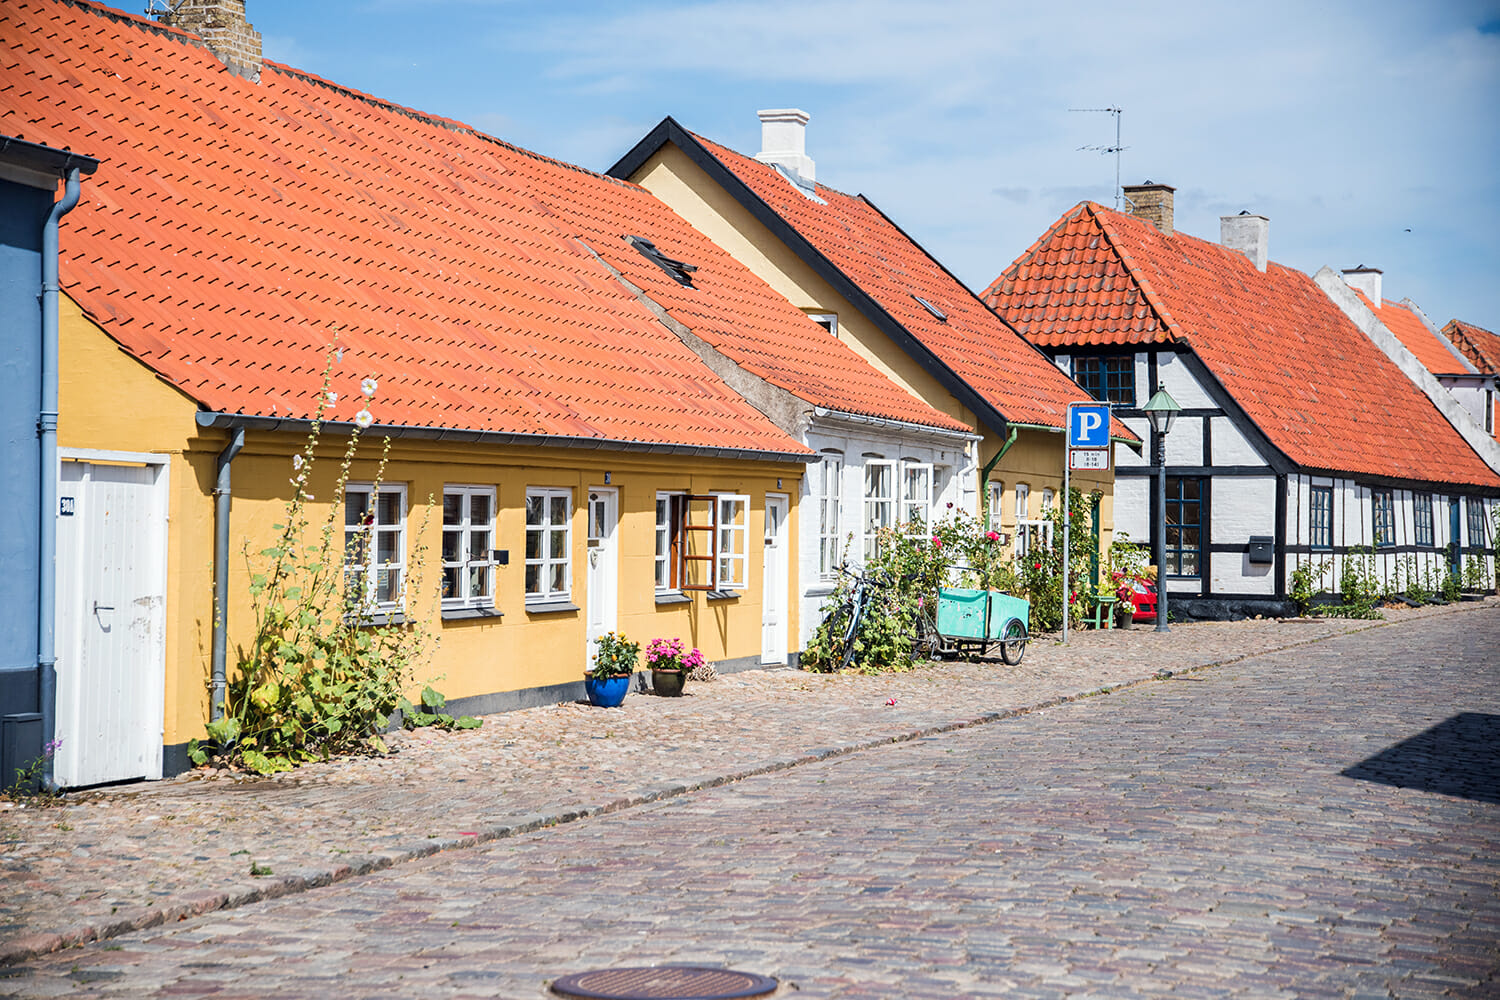 Things to Do in Ebeltoft, Denmark: From Cobblestone Streets to the Harbor